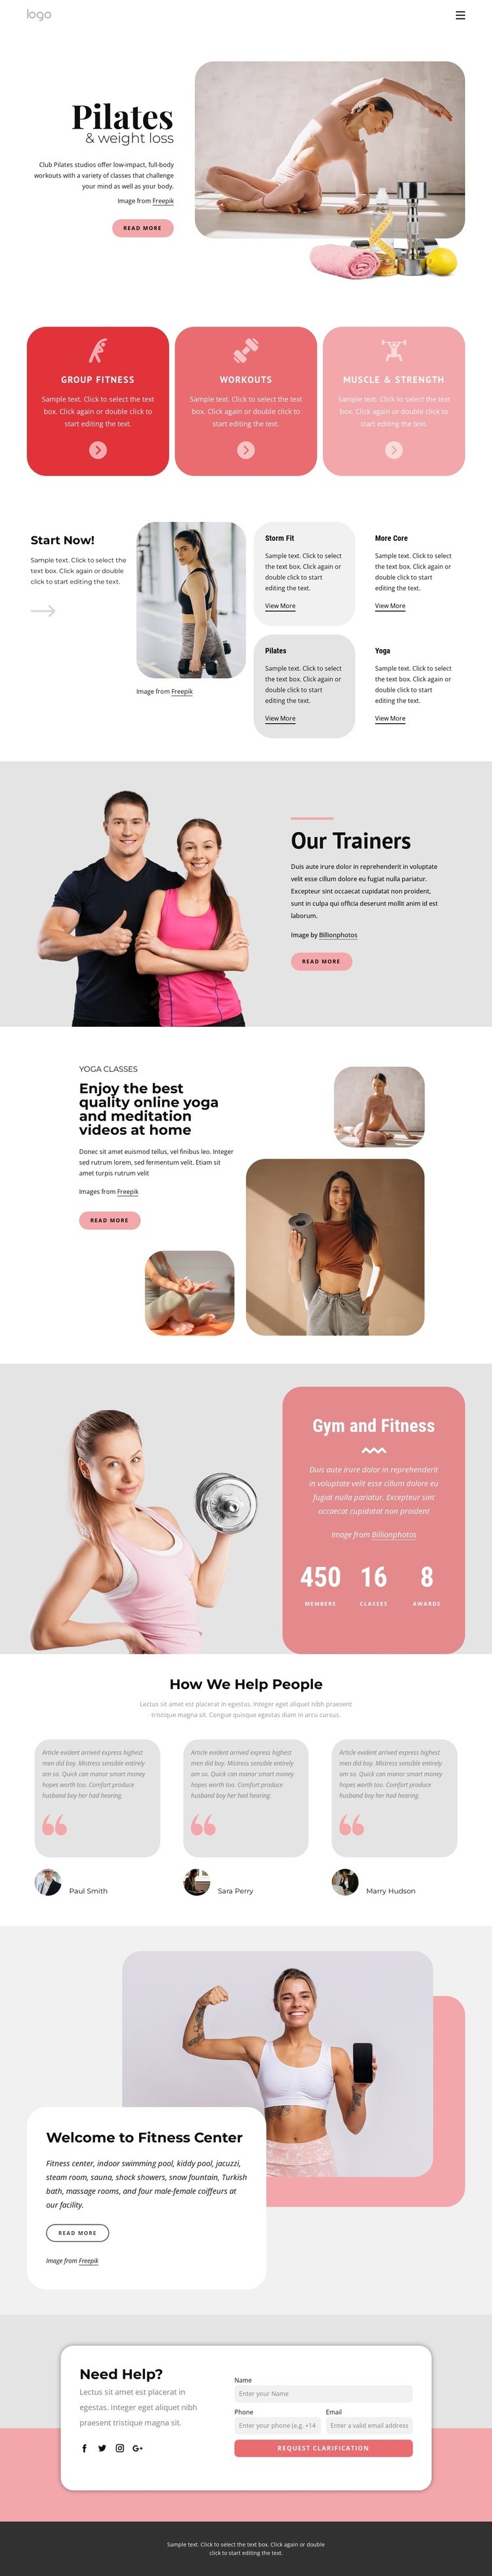 Weight loss programs Web Page Design